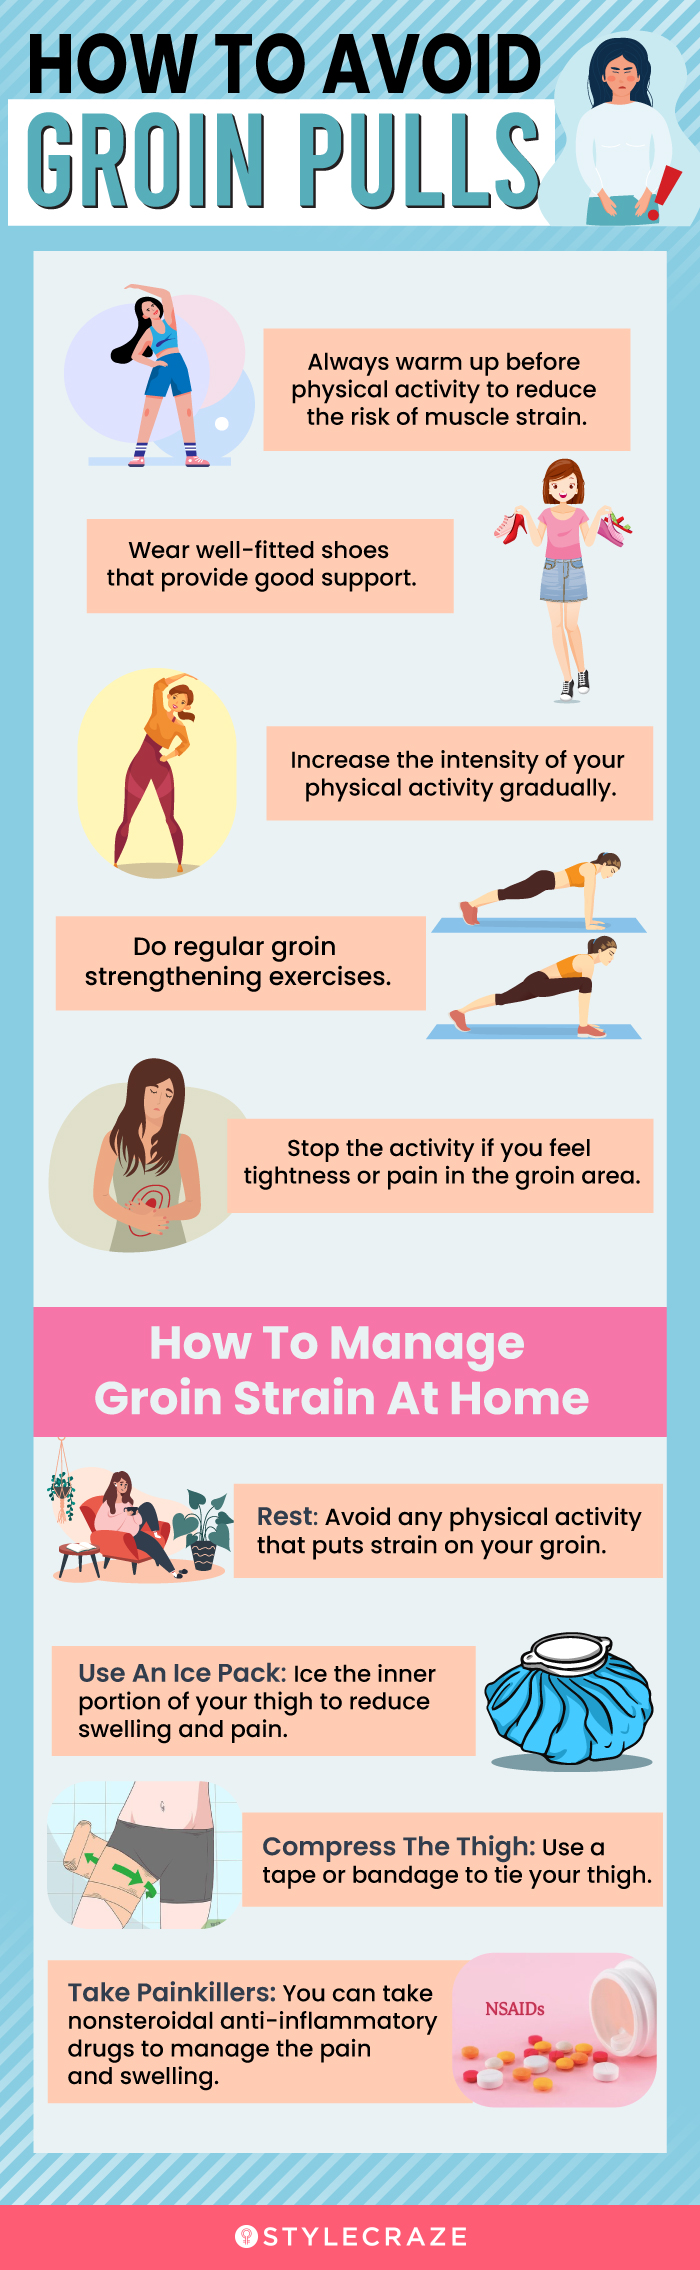 how to avoid groin pulls [infographic]